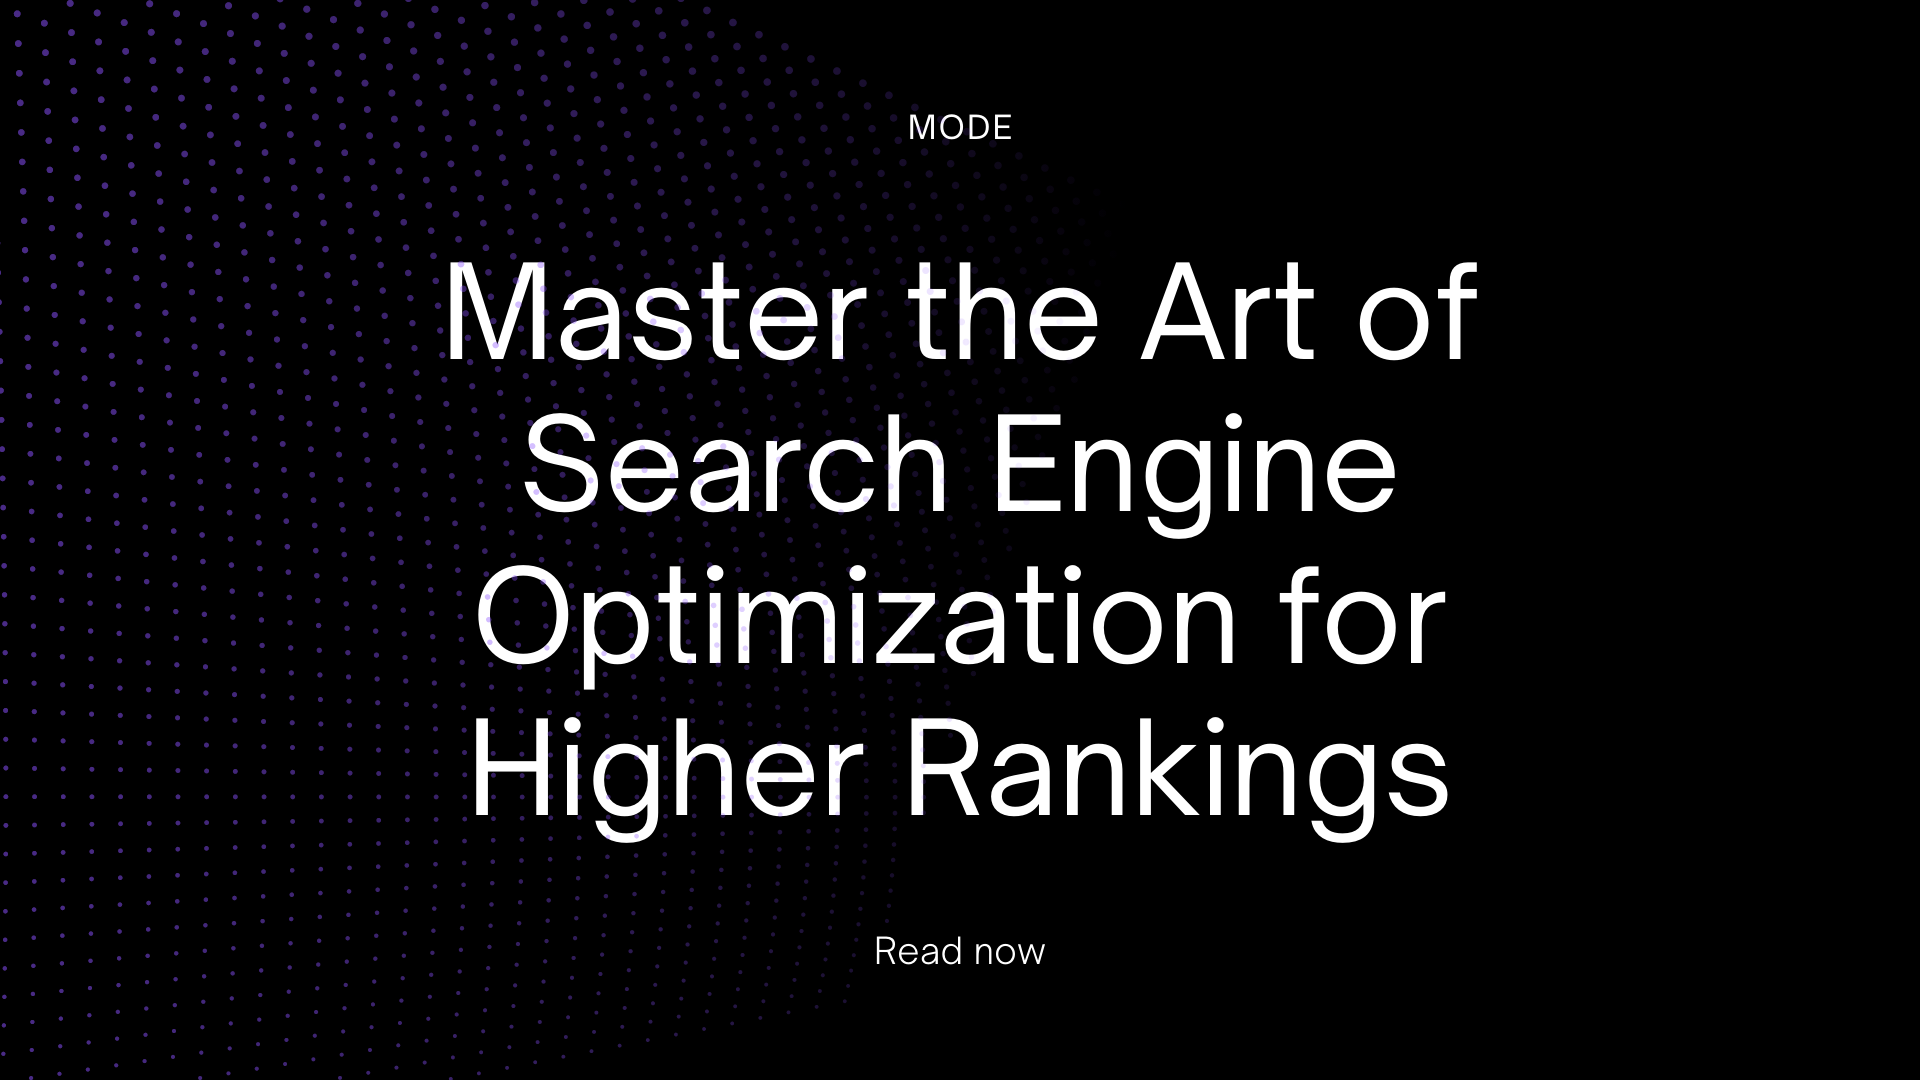 Master the Art of Search Engine Optimization for Higher Rankings